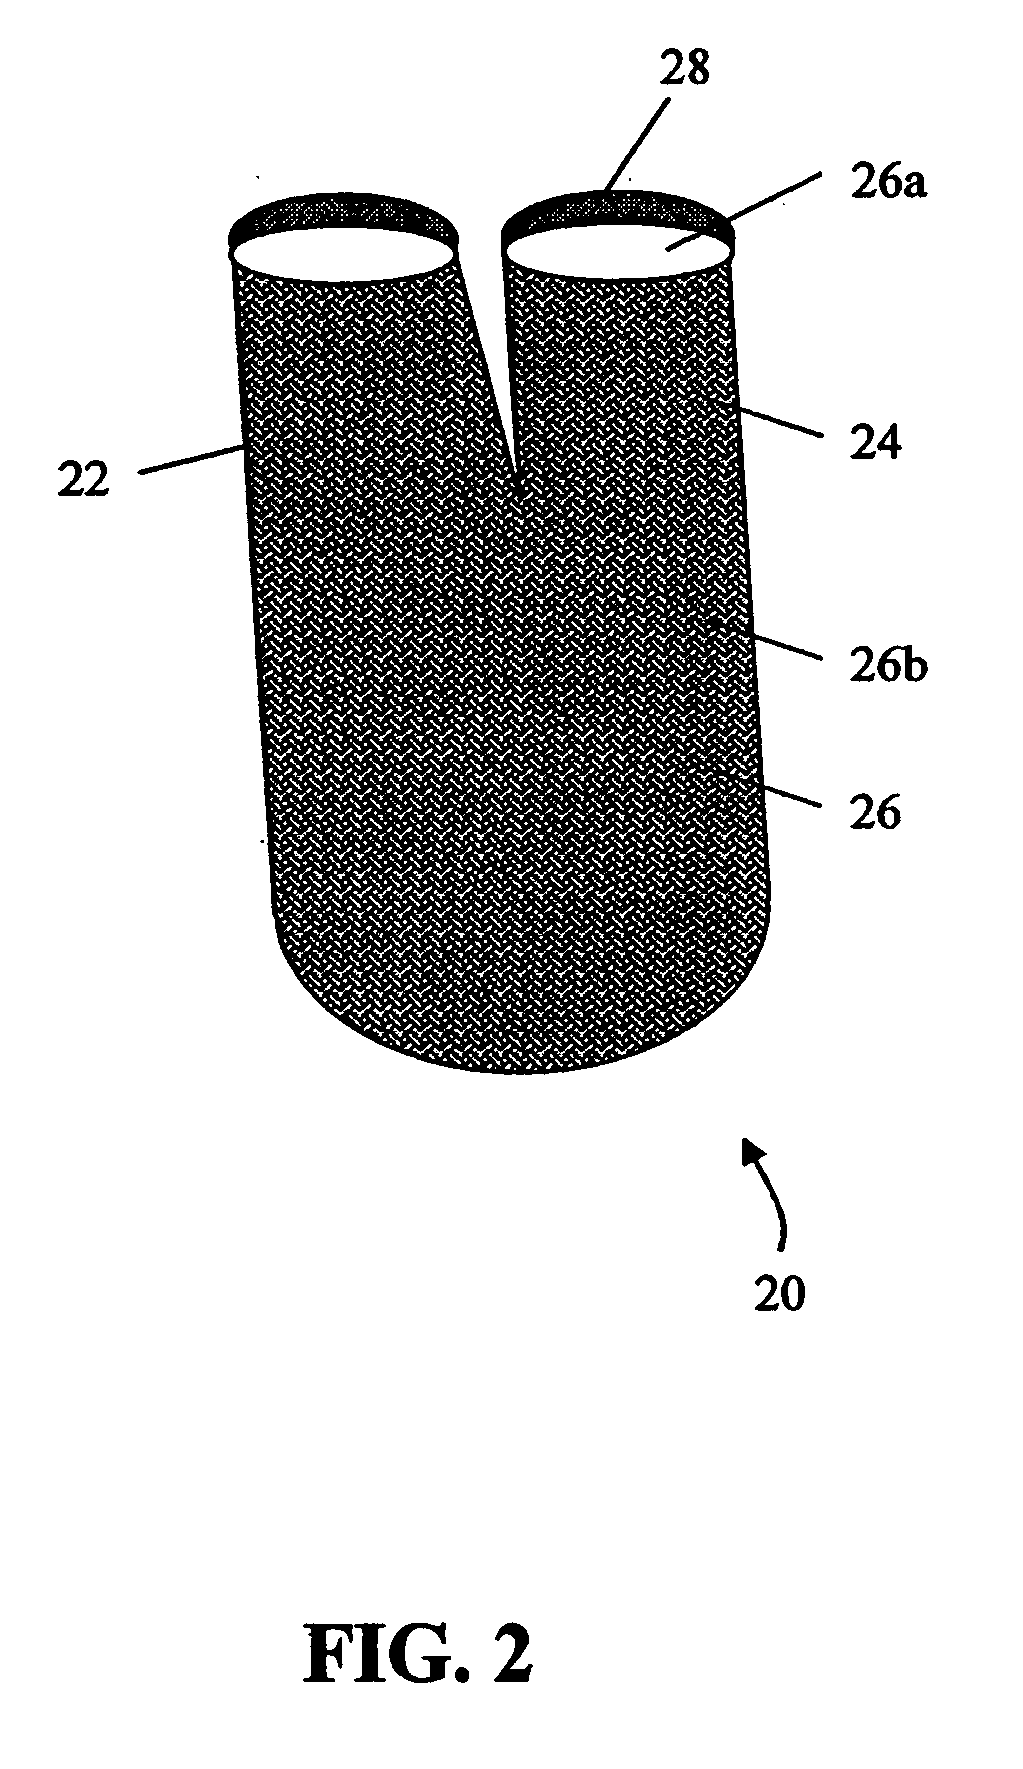 Implantable prosthesis having reinforced attachment sites